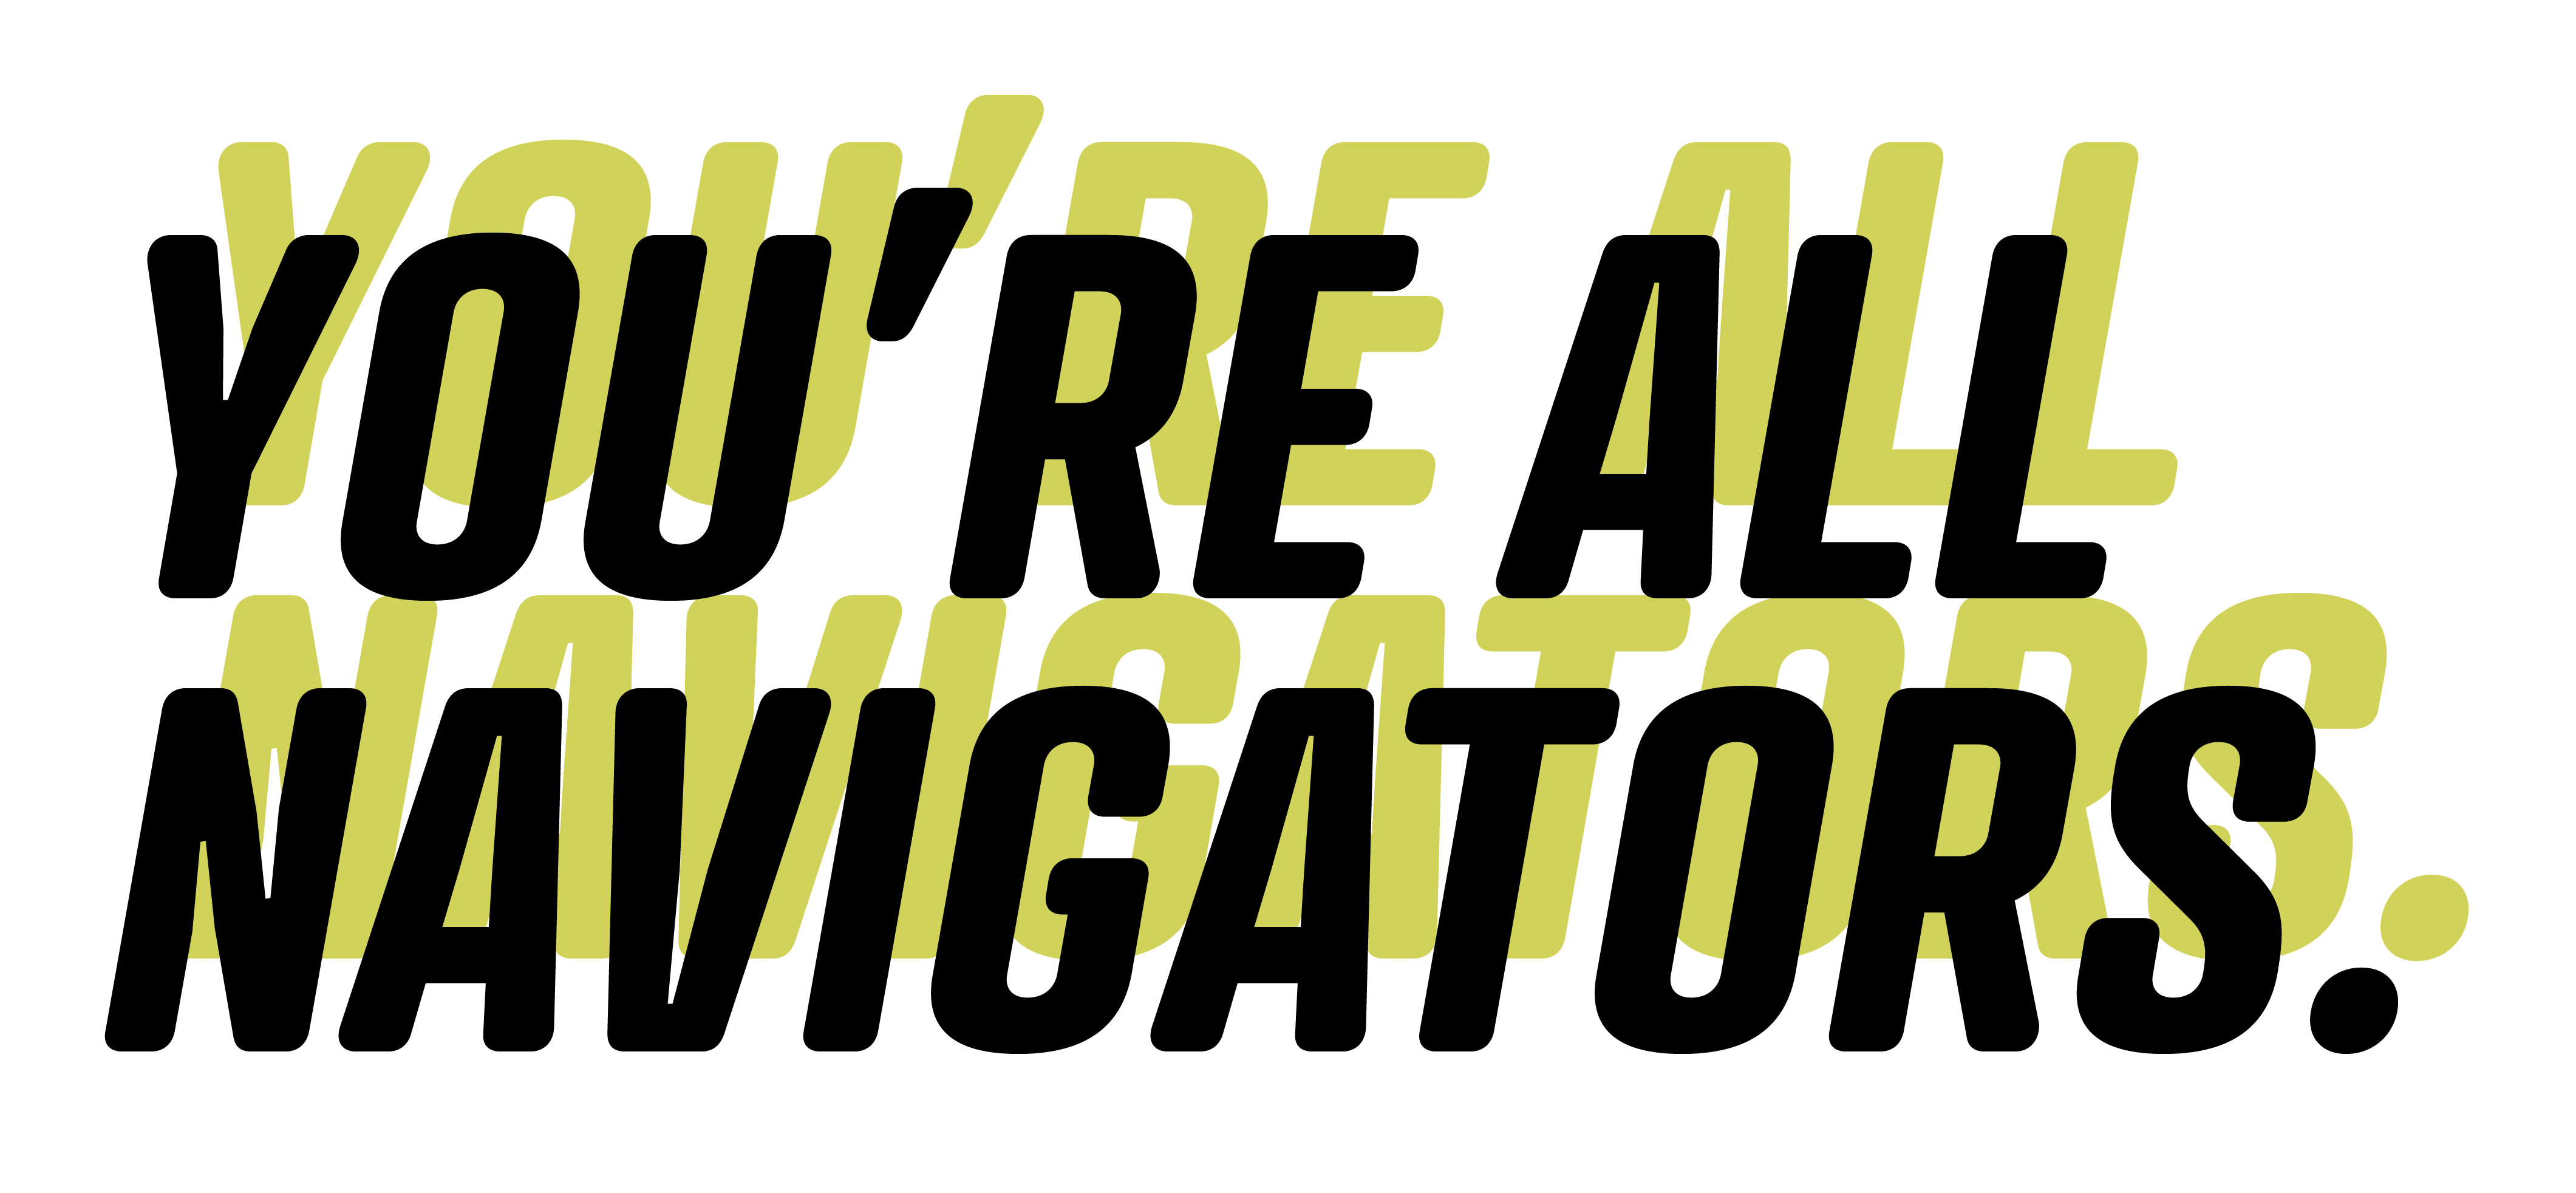 black text with a yellow green shadow that reads "You're all Navigators."